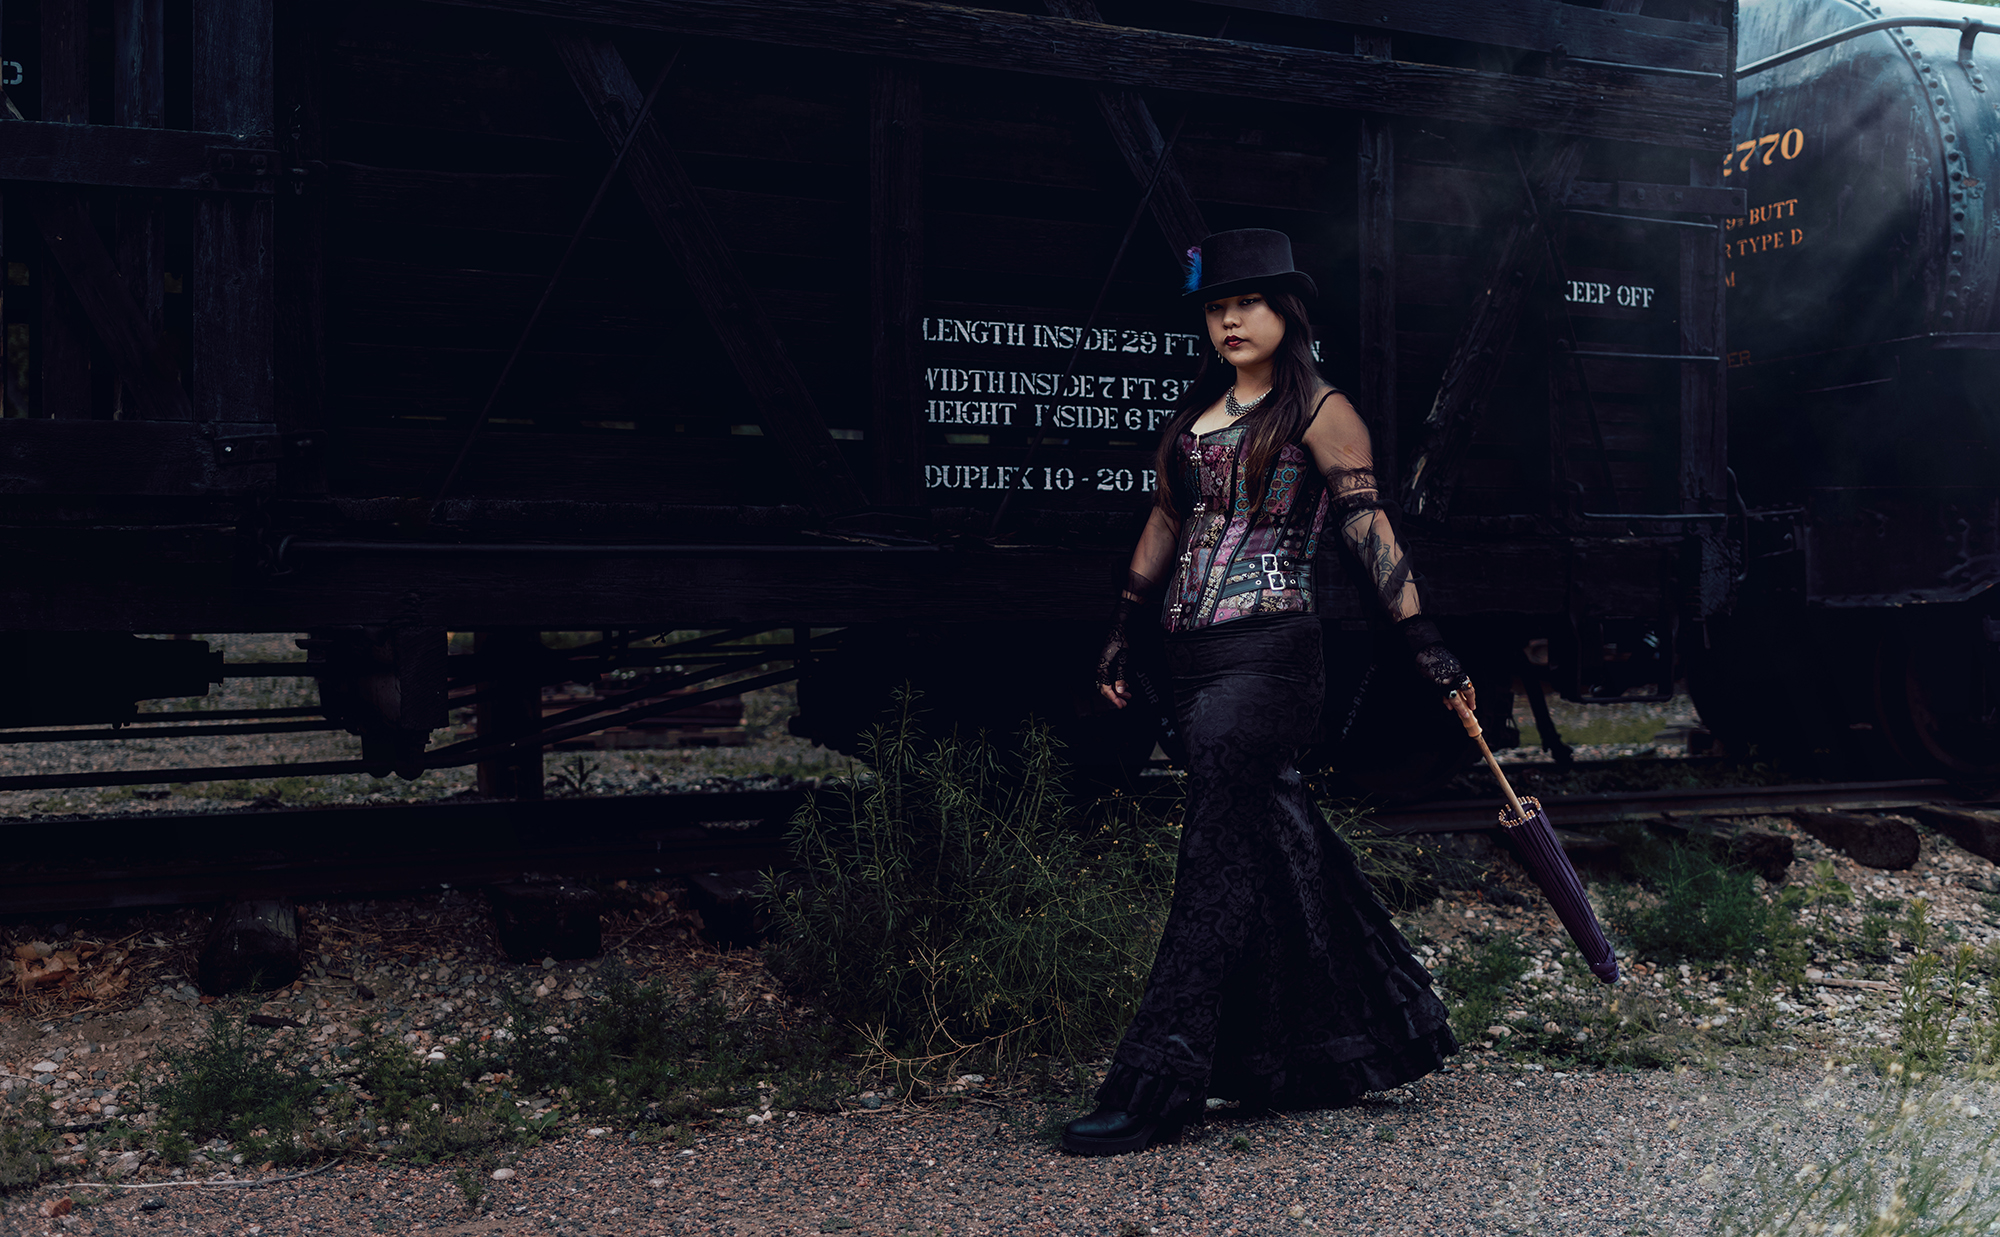 A woman walks next to a wooden train car wearing a Victorian style steampunk outfit holding a purple parasol